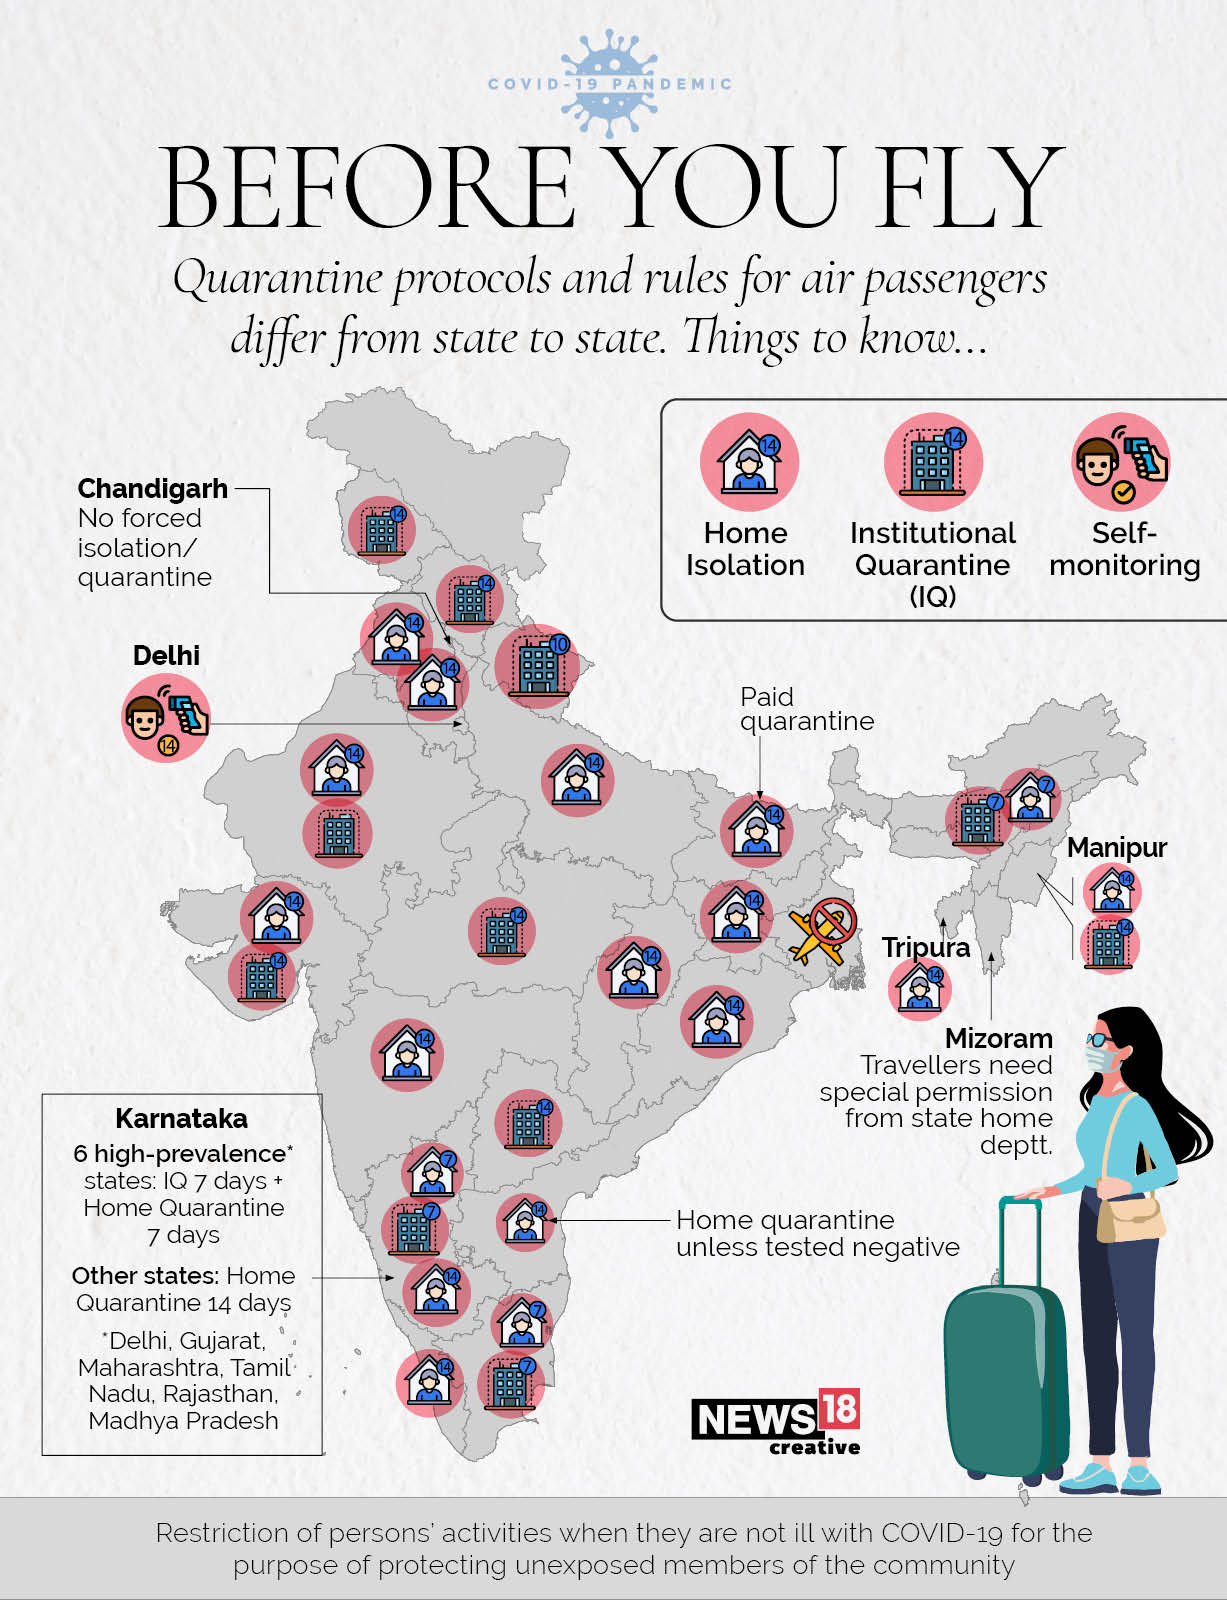 Flying domestic? See state rules for quarantine, at a glance